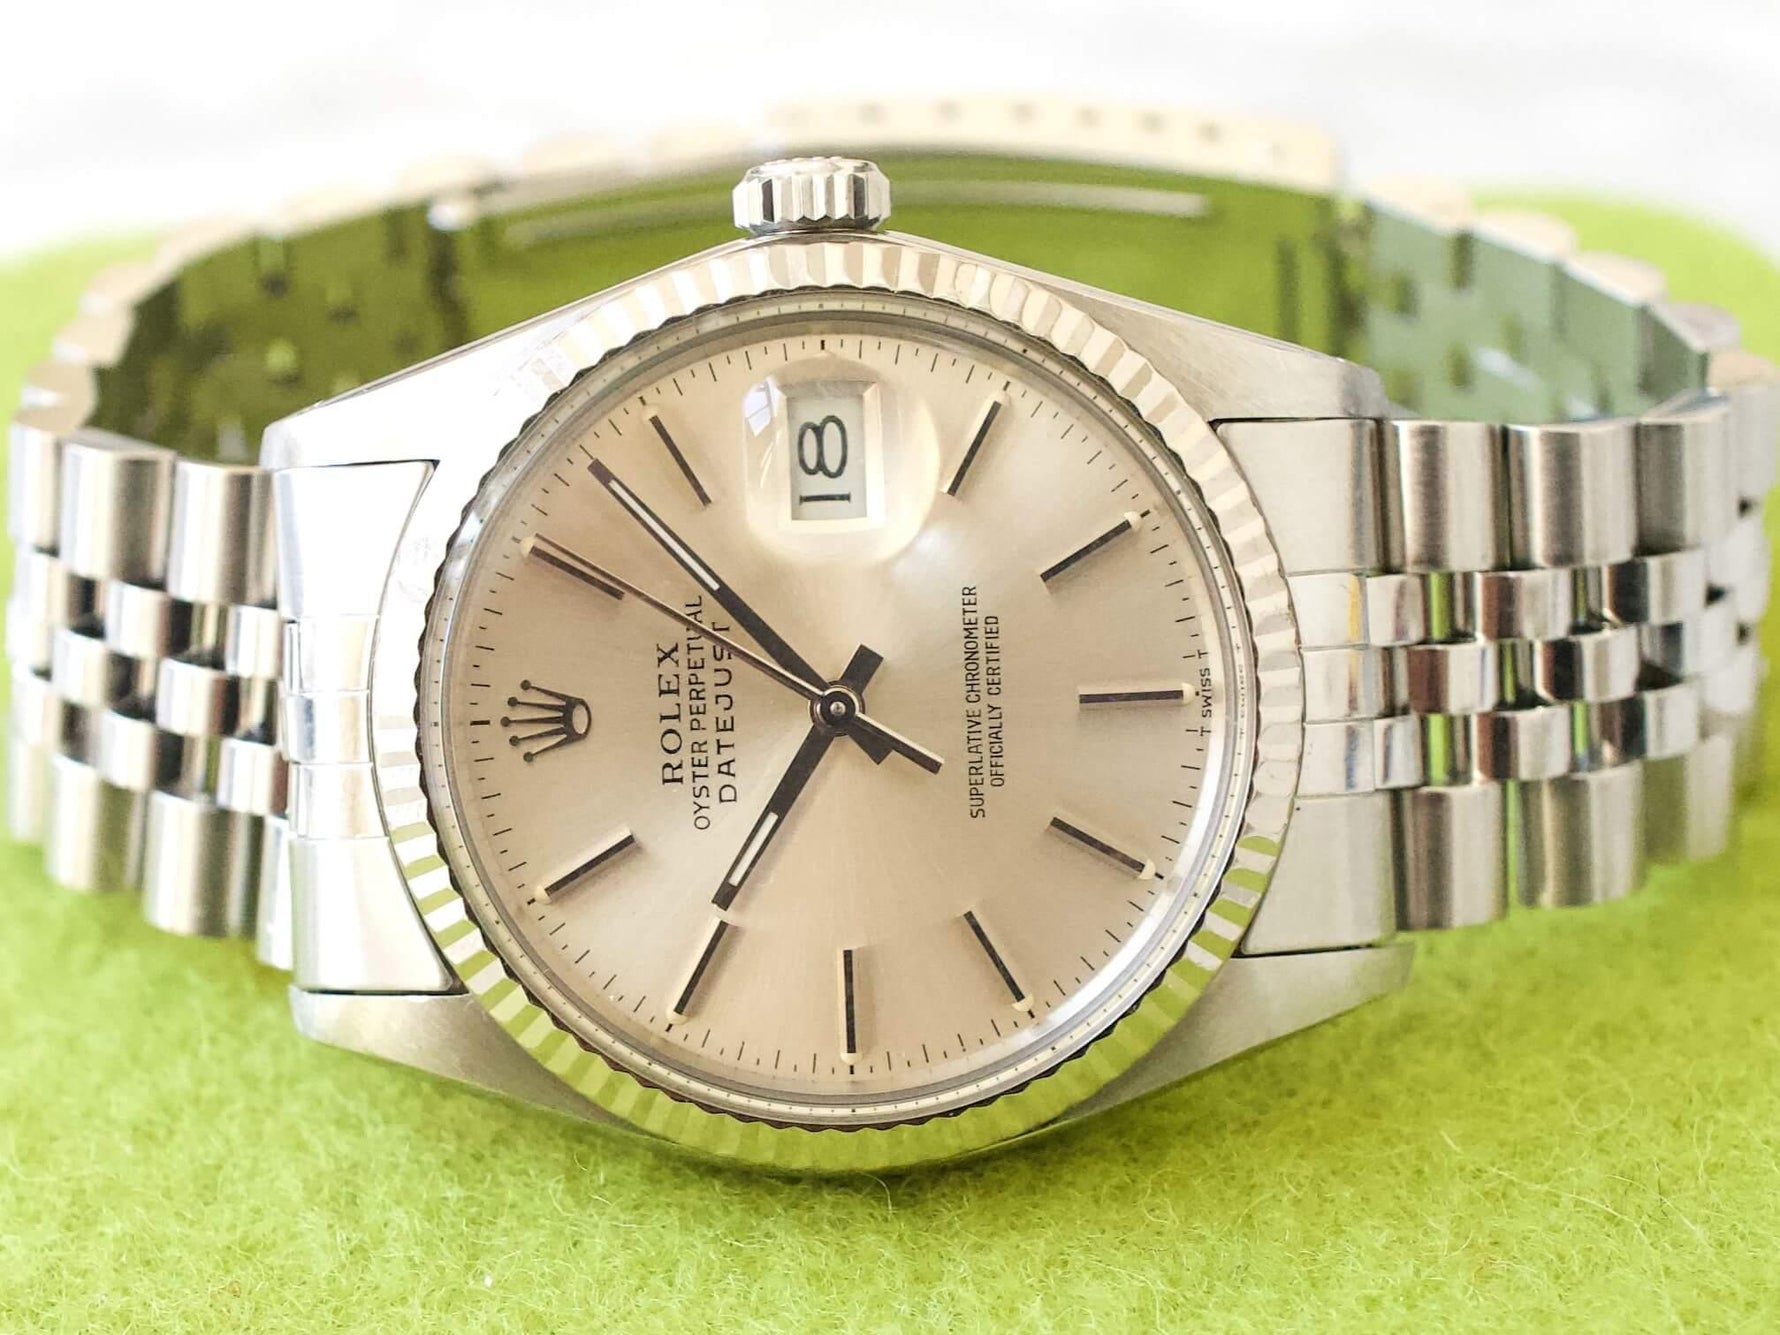 Sold Out: Rolex 16014 Datejust 36 Quickset Factory Rolex Service Box Card 18k Bezel Automatic (Serviced by Rolex in 2021) - WearingTime Luxury Watches